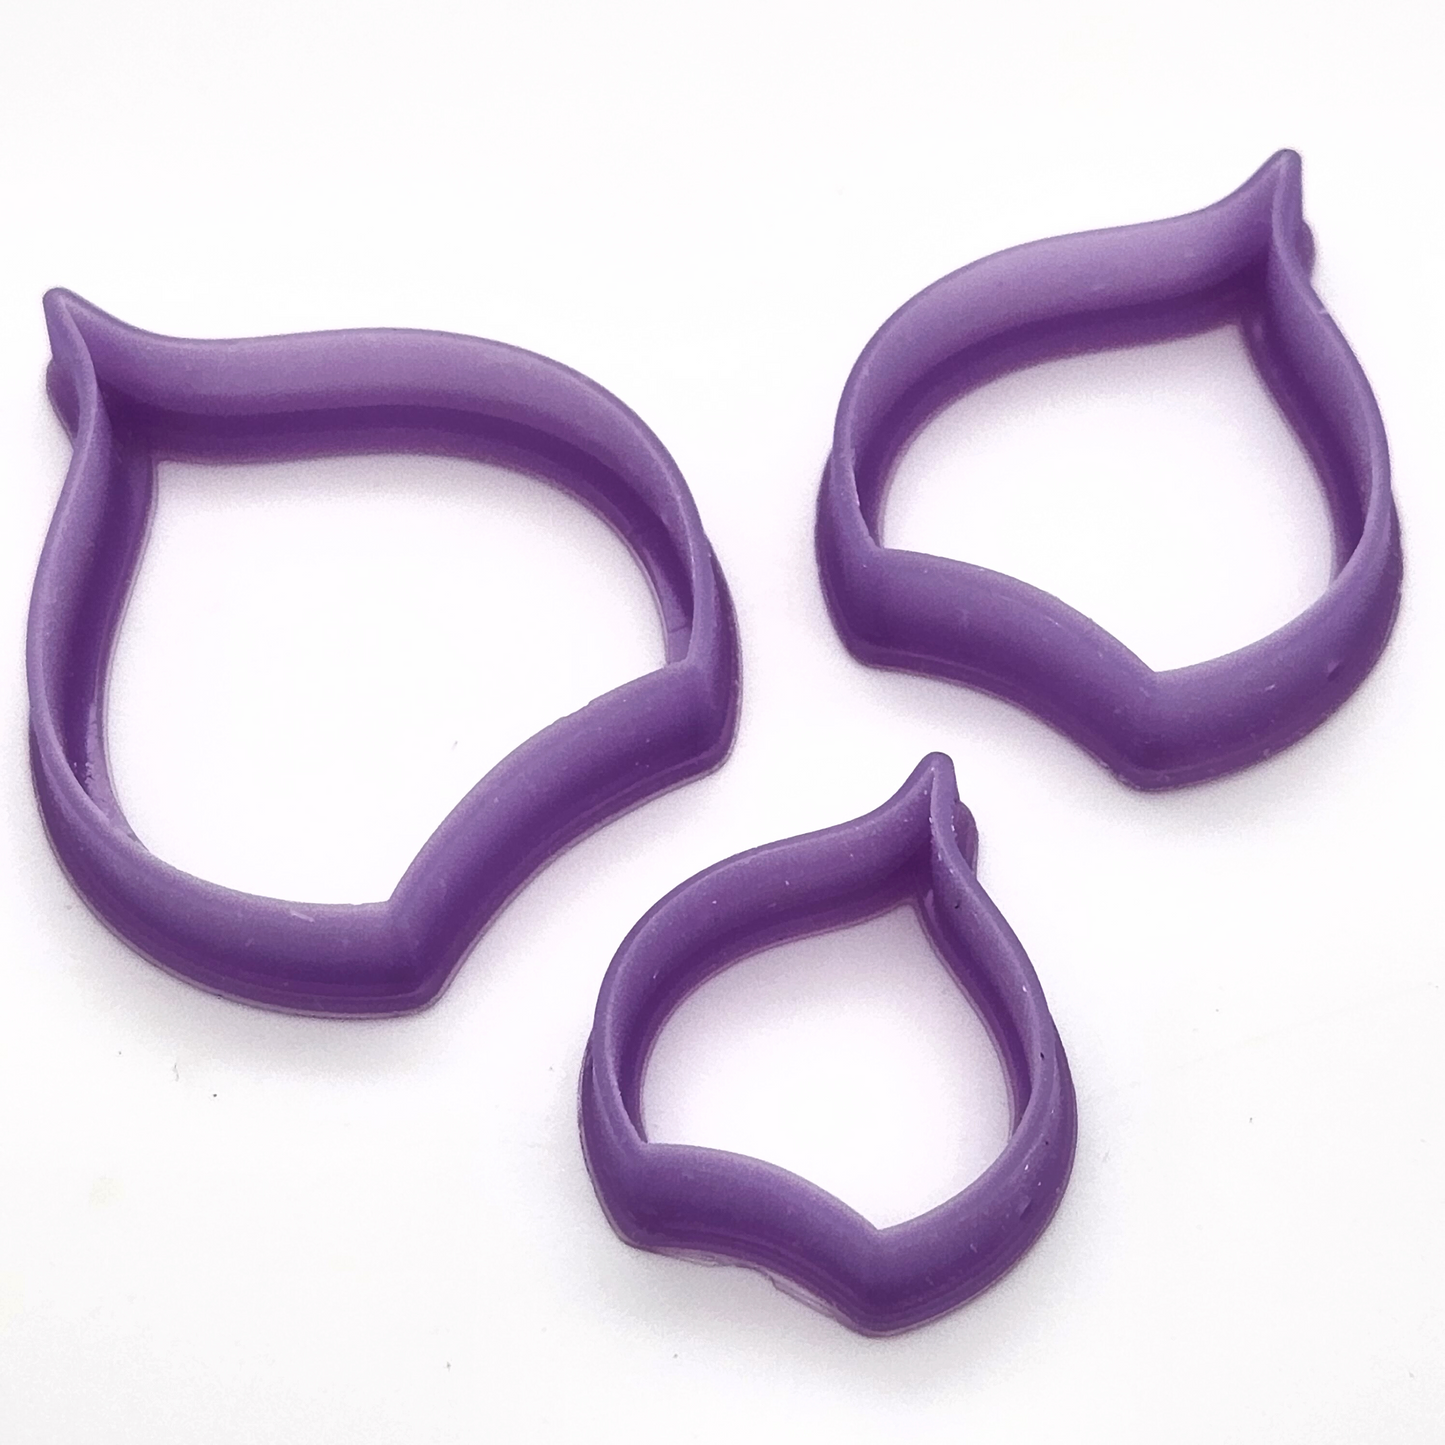 3D printed Calla Lily Petal shape polymer clay cutters, in three sizes